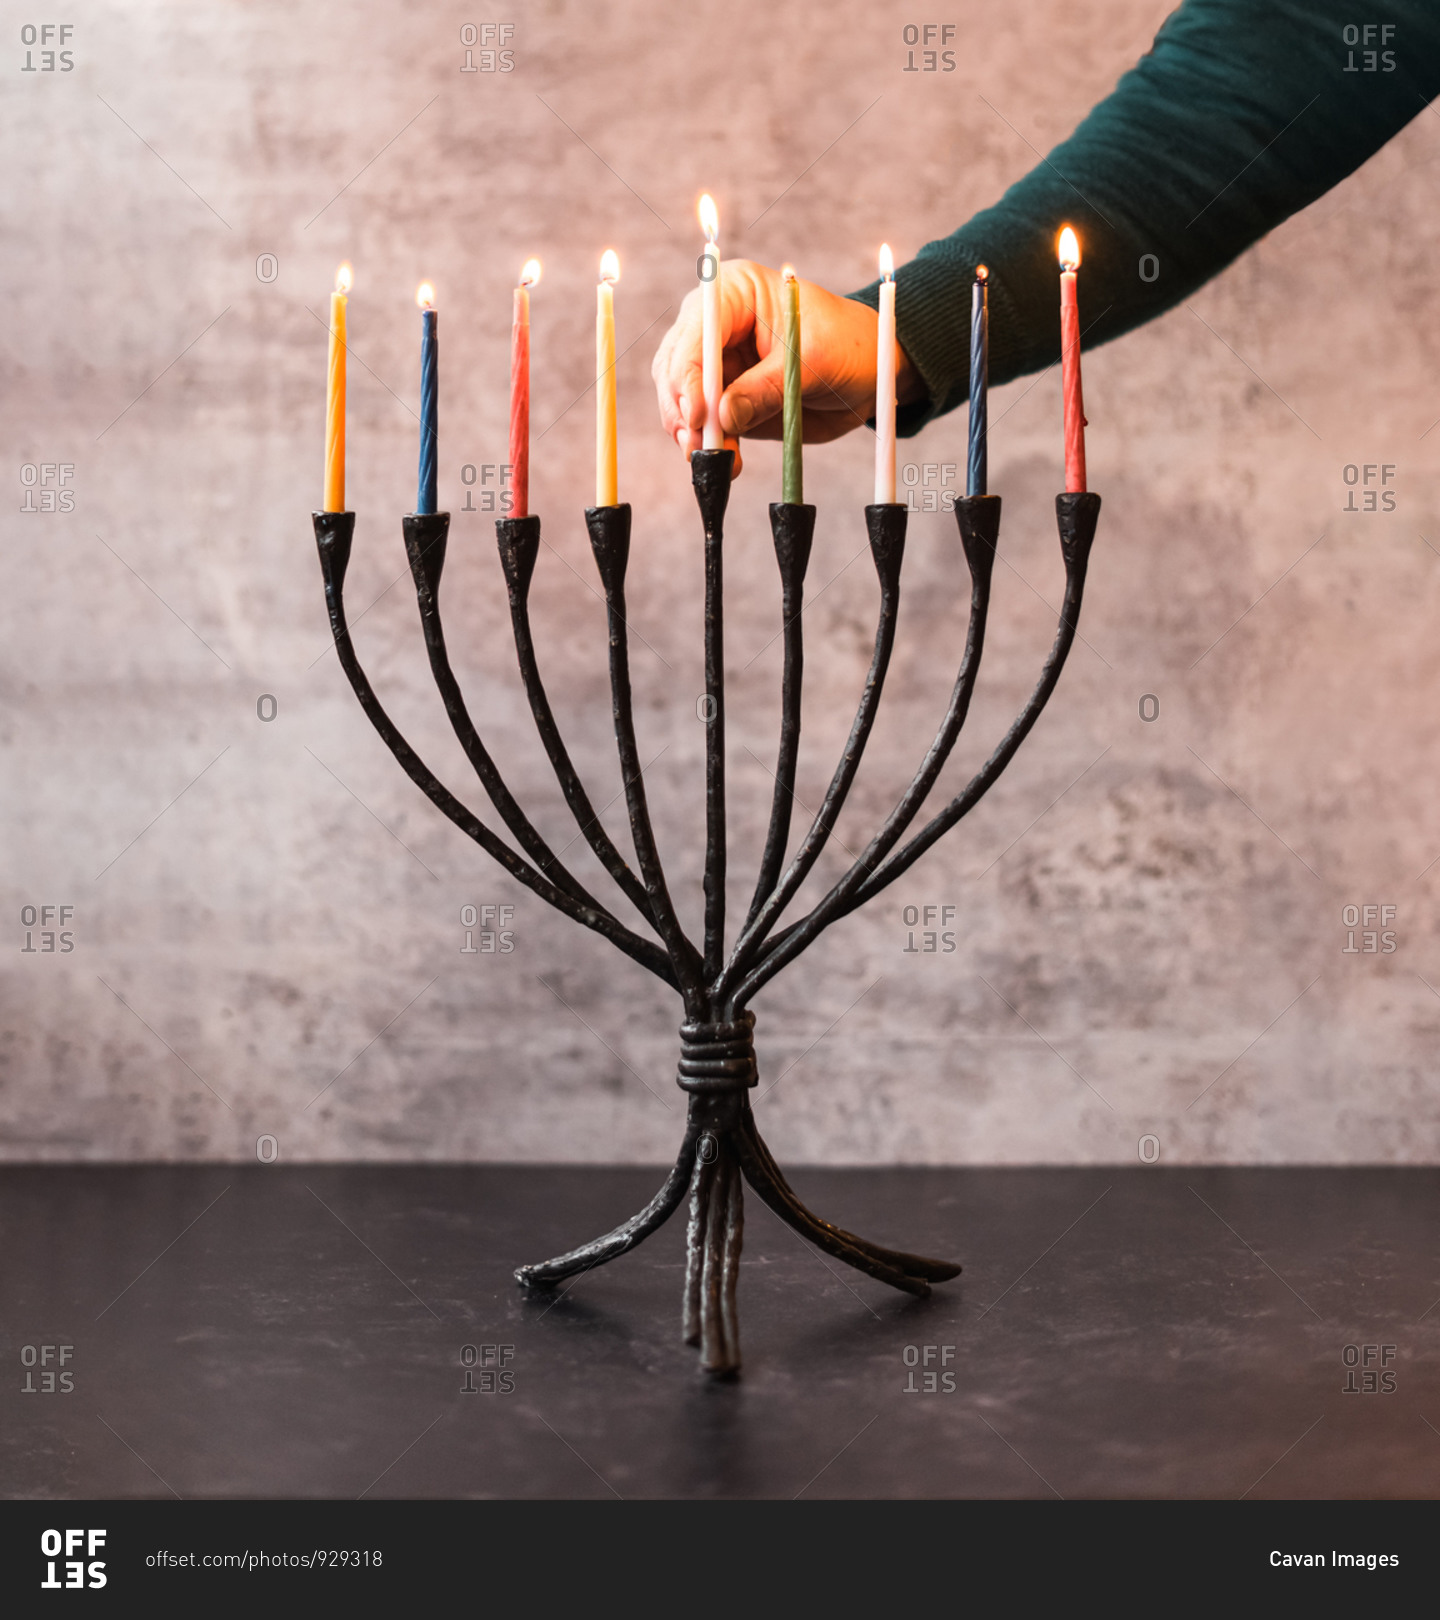 Woman\'s hand placing a lit candle in a menorah for Hanukkah.